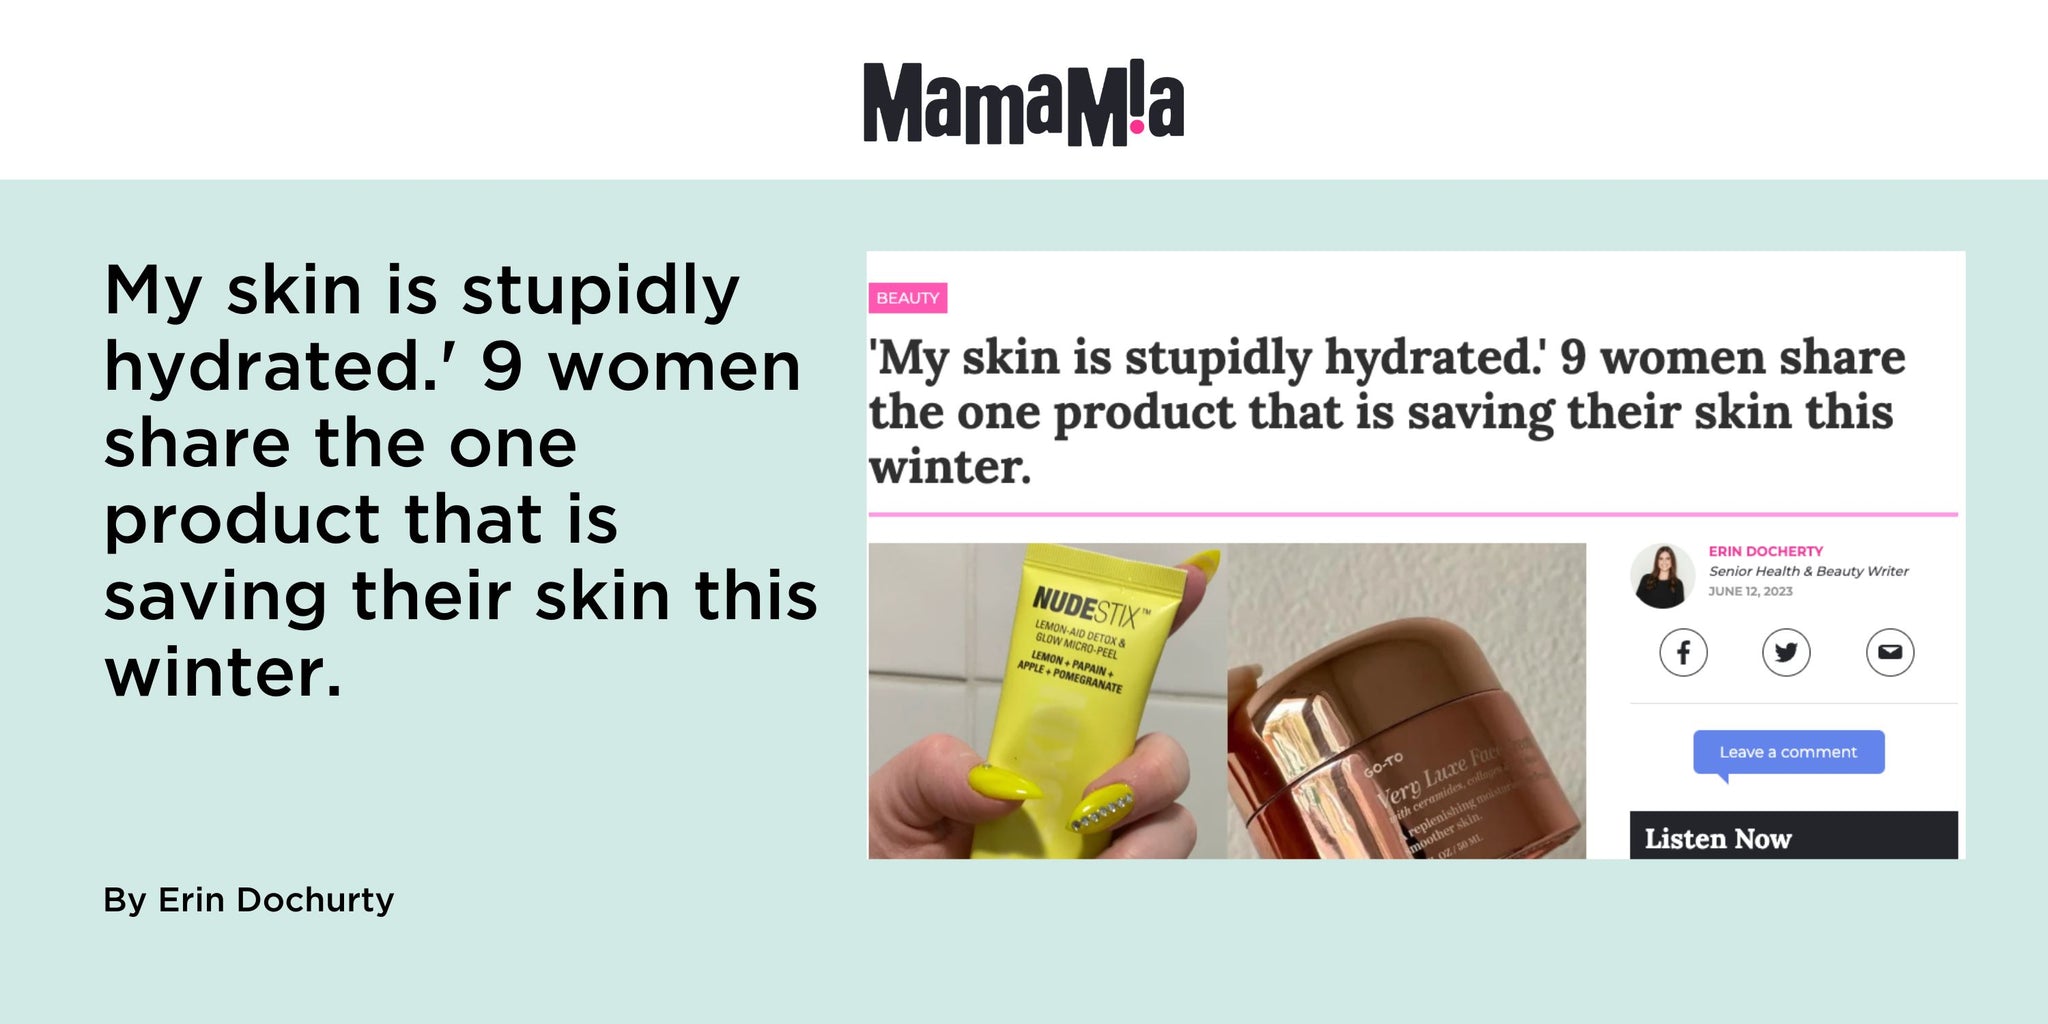 'My skin is stupidly hydrated.' 9 women share the one product that is saving their skin this winter.